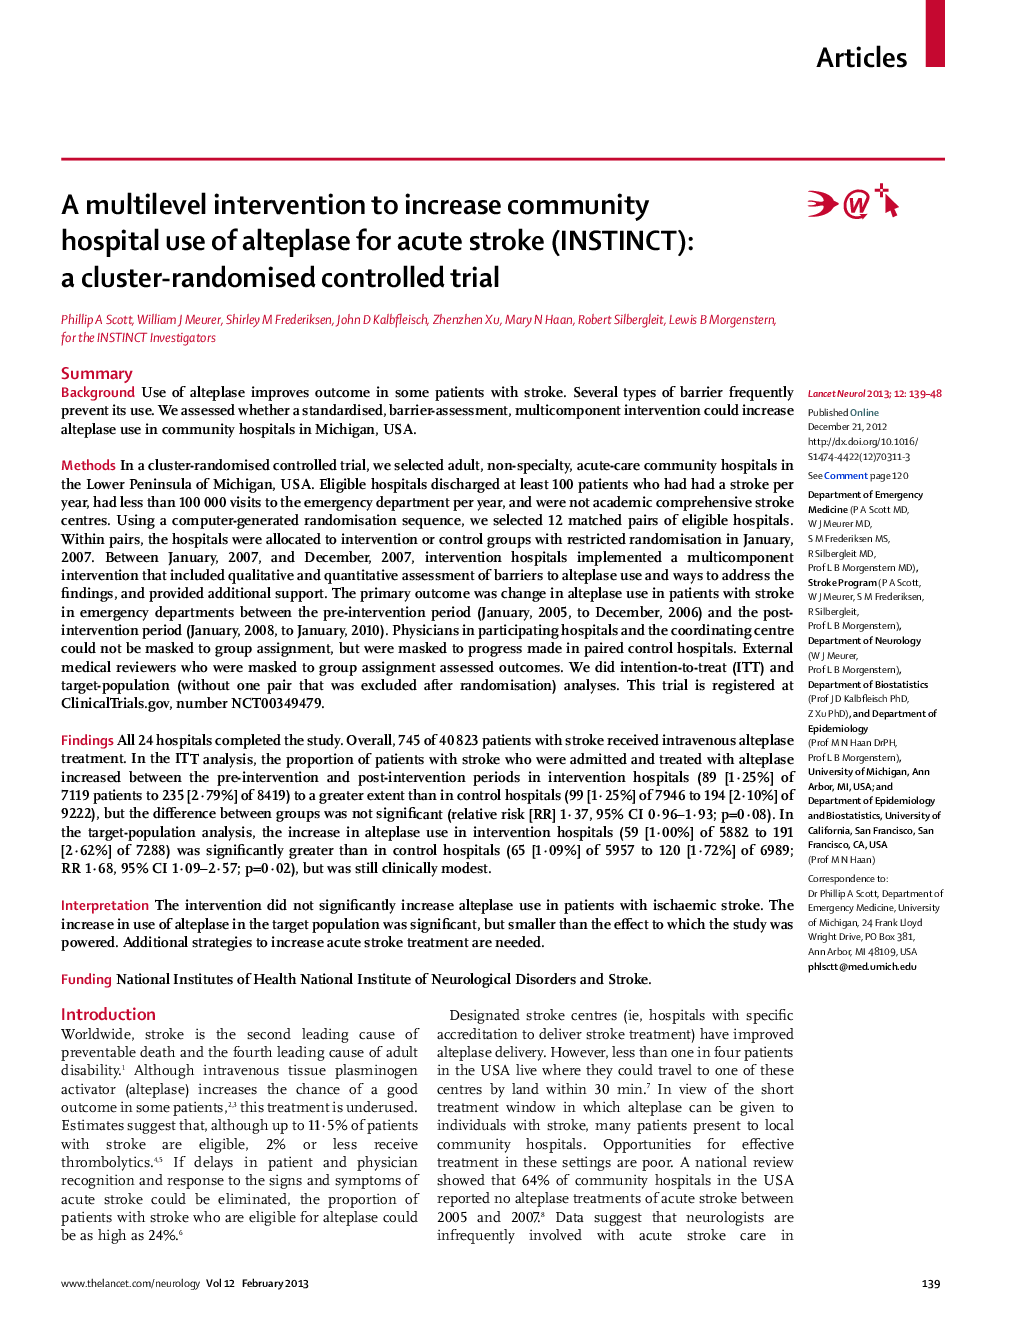 A multilevel intervention to increase community hospital use of alteplase for acute stroke (INSTINCT): a cluster-randomised controlled trial